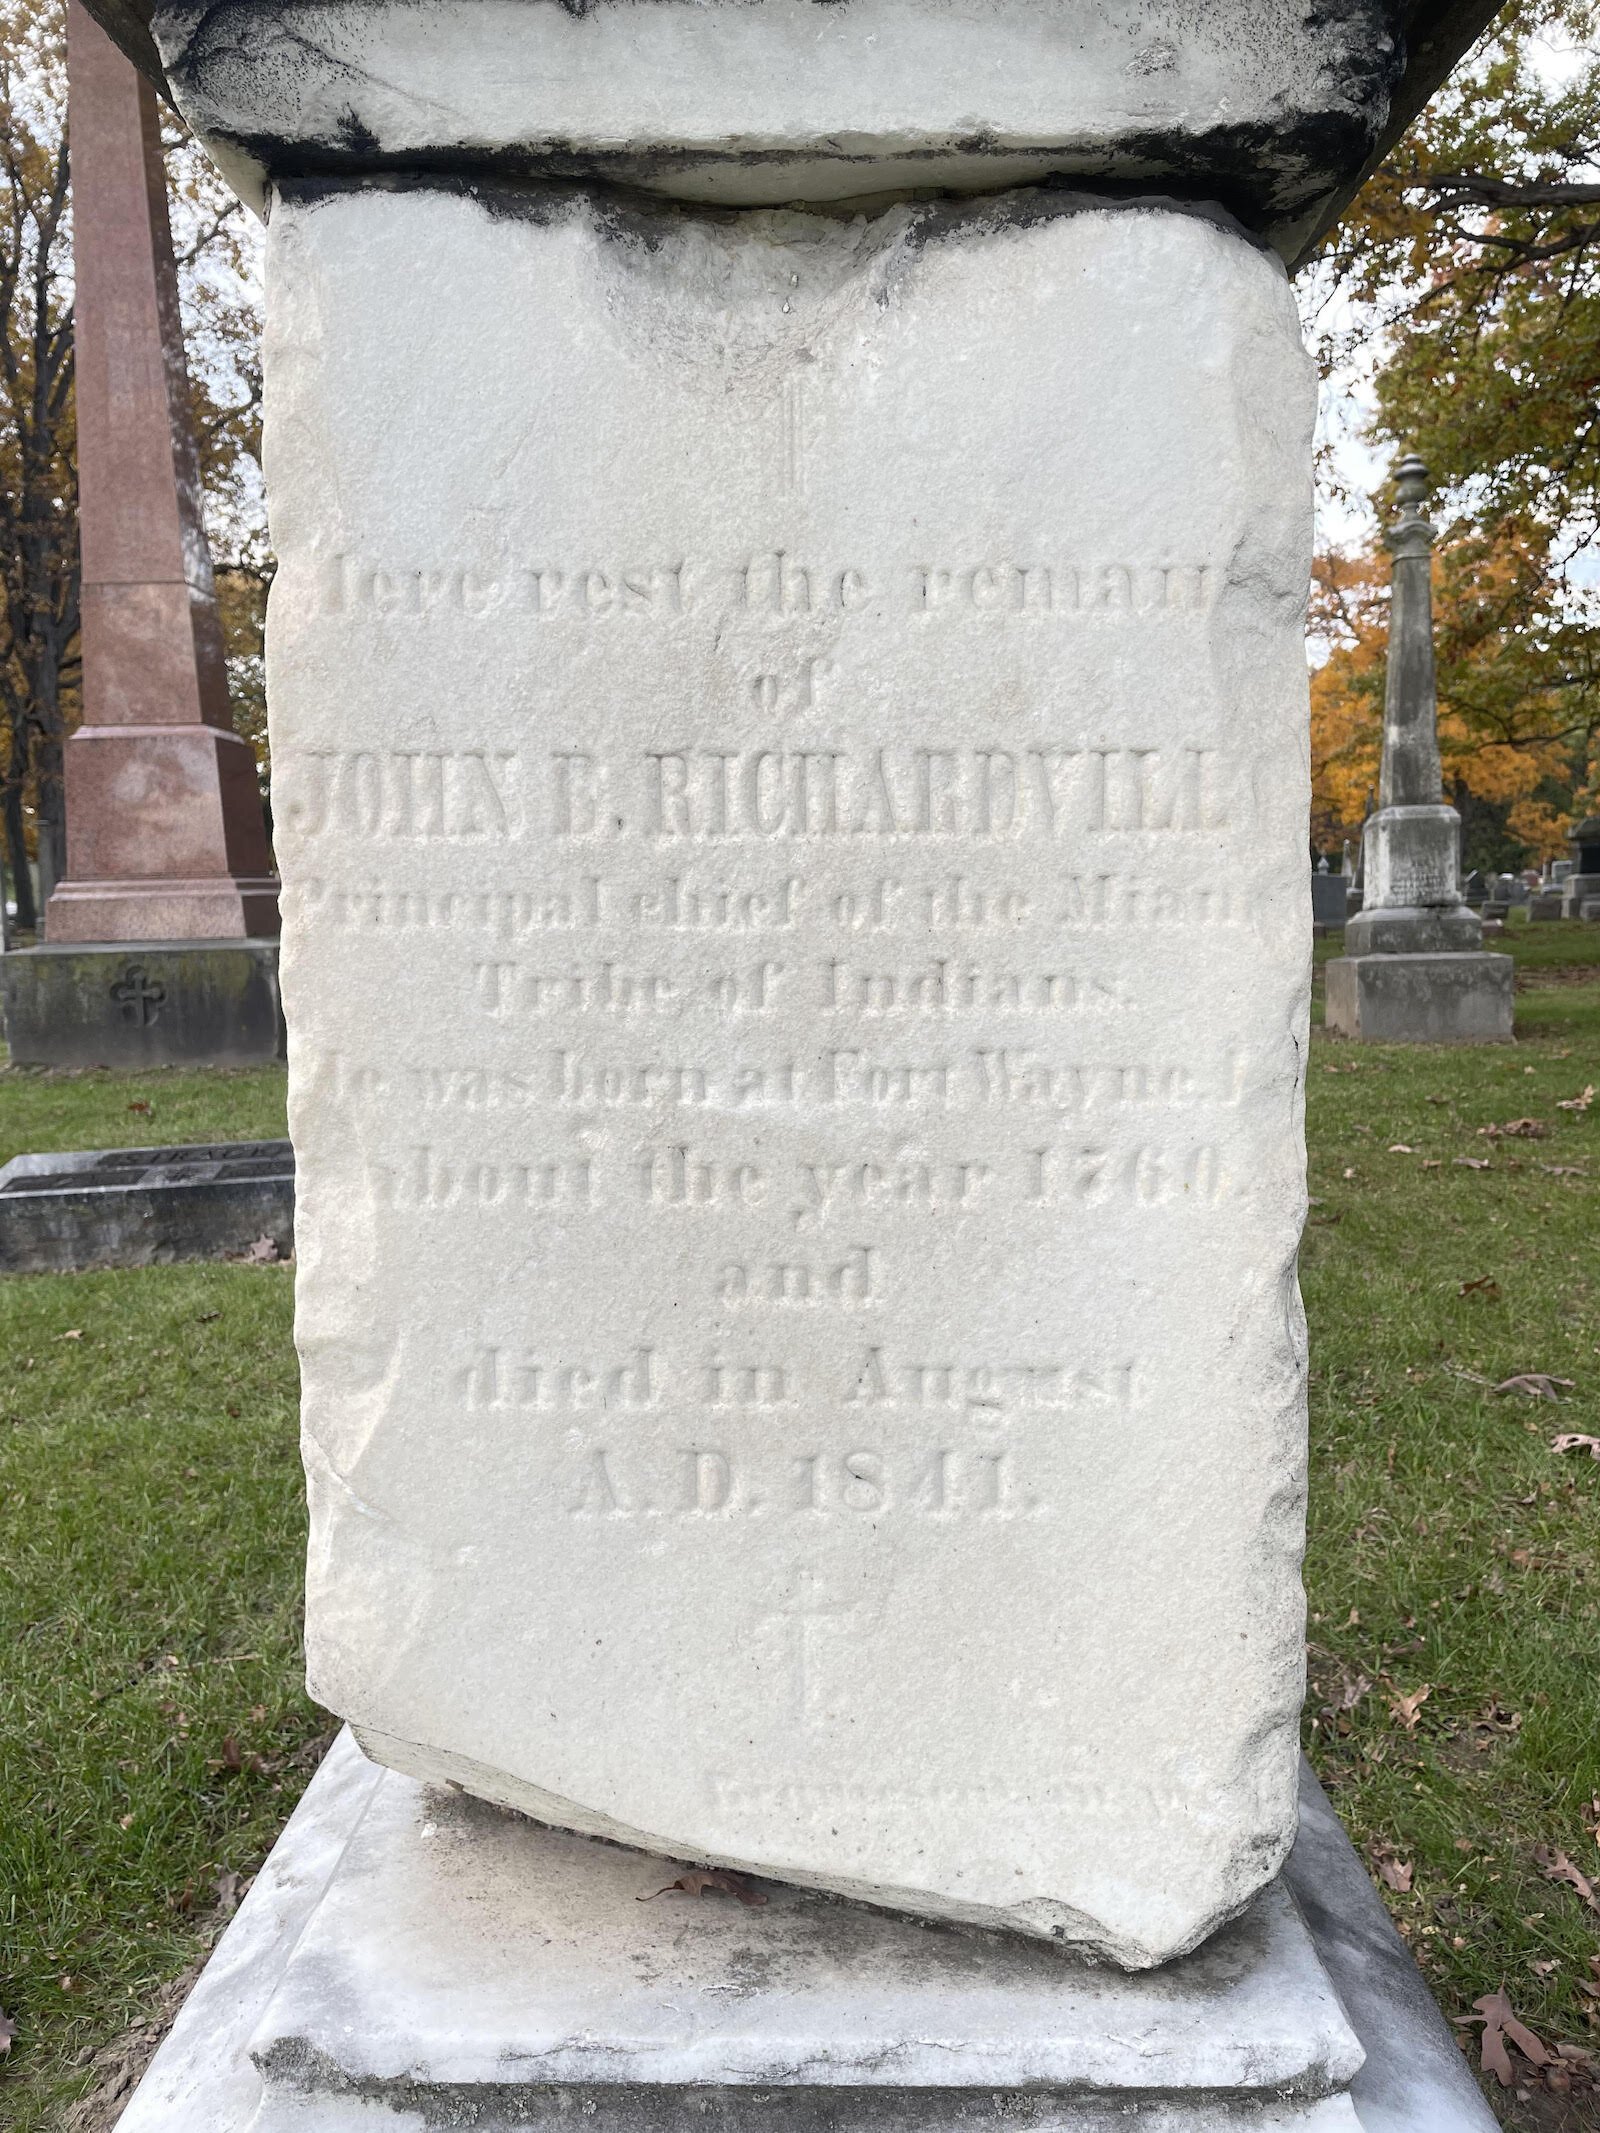 A memorial remembering Chief Richardville stands in the Catholic cemetery on Lake Avenue. However, there is debate about whether his body was moved when the cemetery was built.